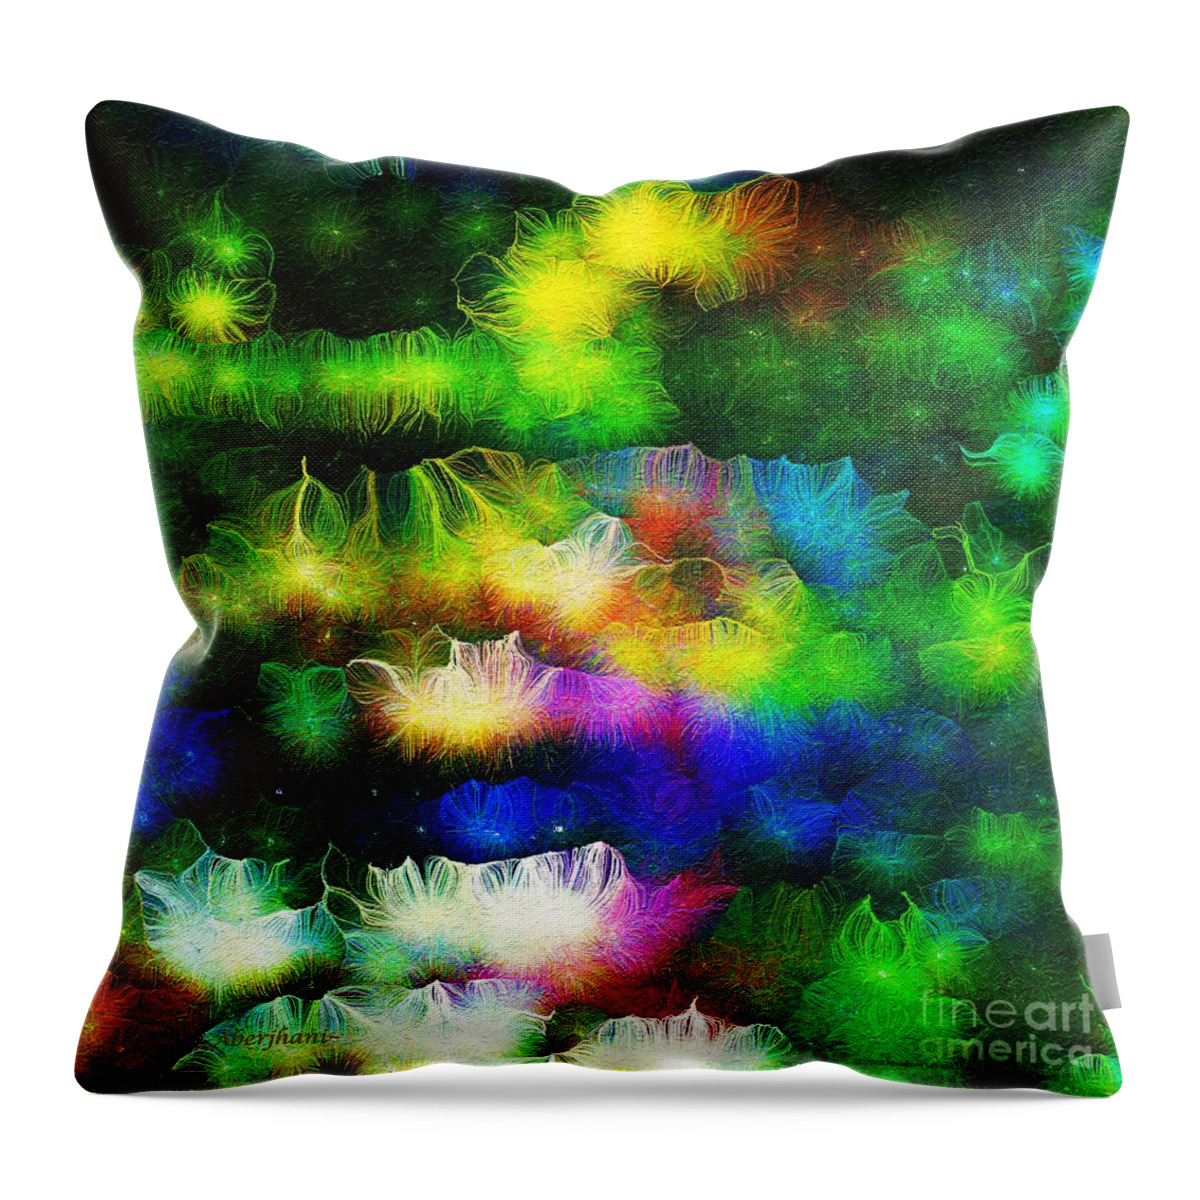 Book Art Throw Pillow featuring the digital art Converging Grace Number 2 without Text by Aberjhani